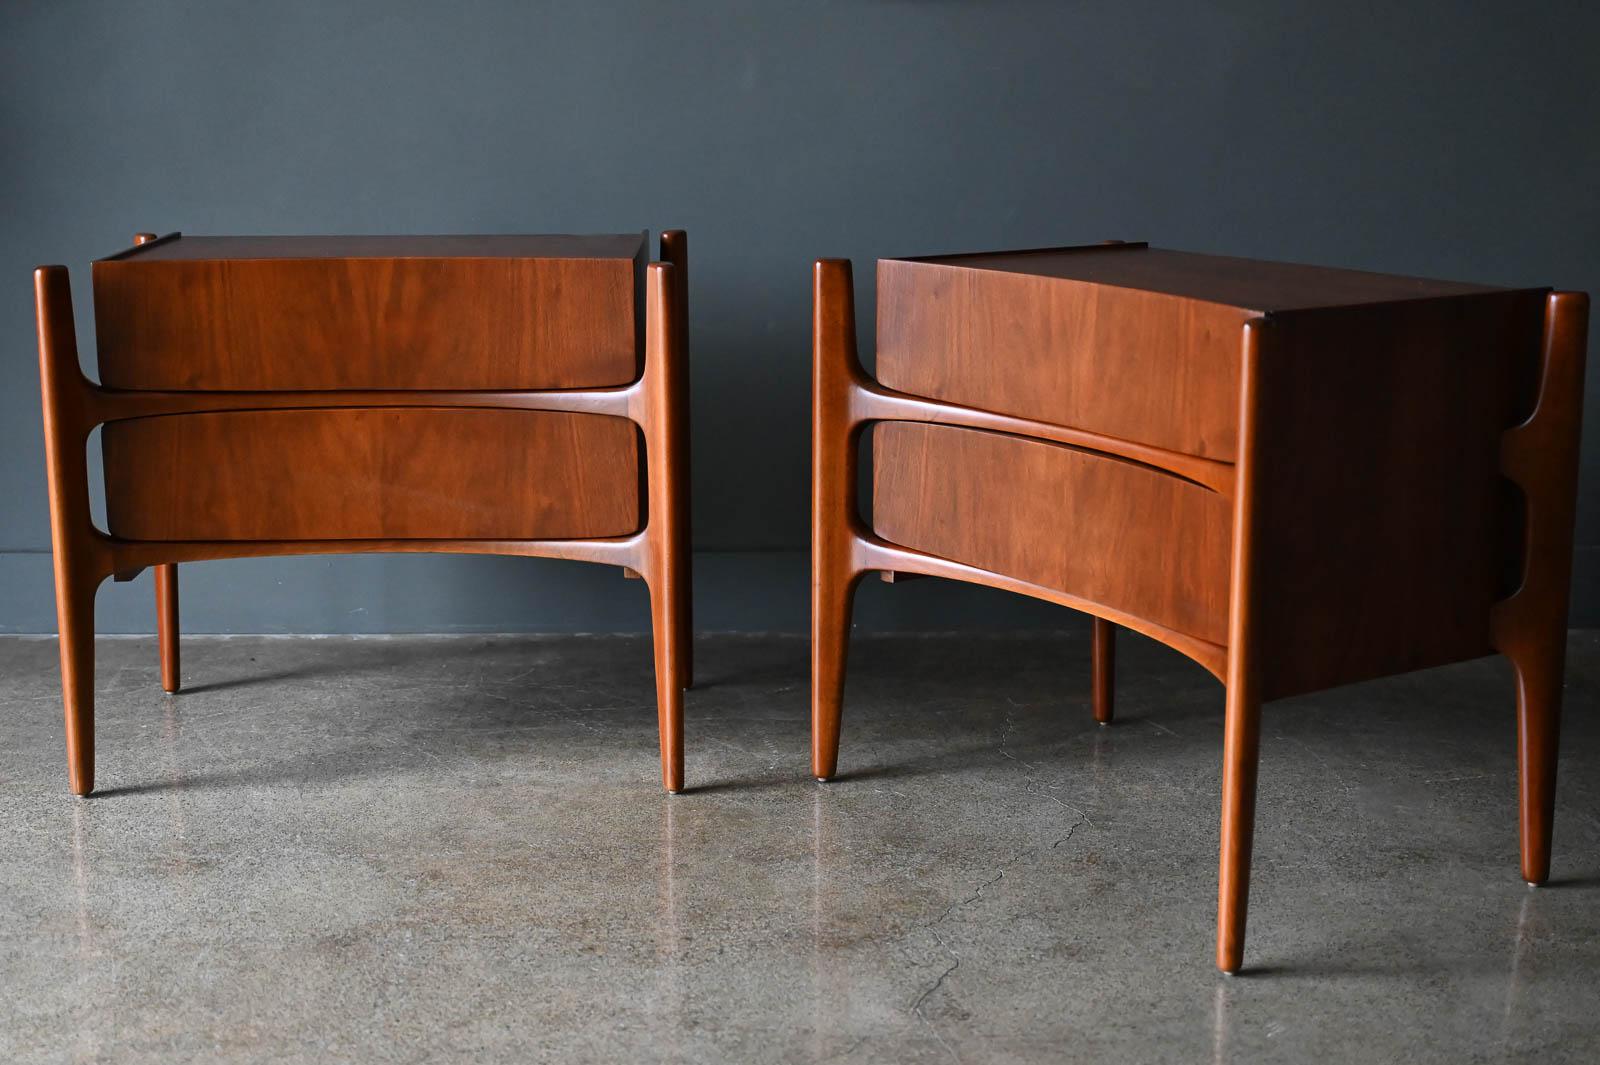 Swedish Pair of Walnut Sculpted Nightstands or End Tables by William Hinn, circa 1955